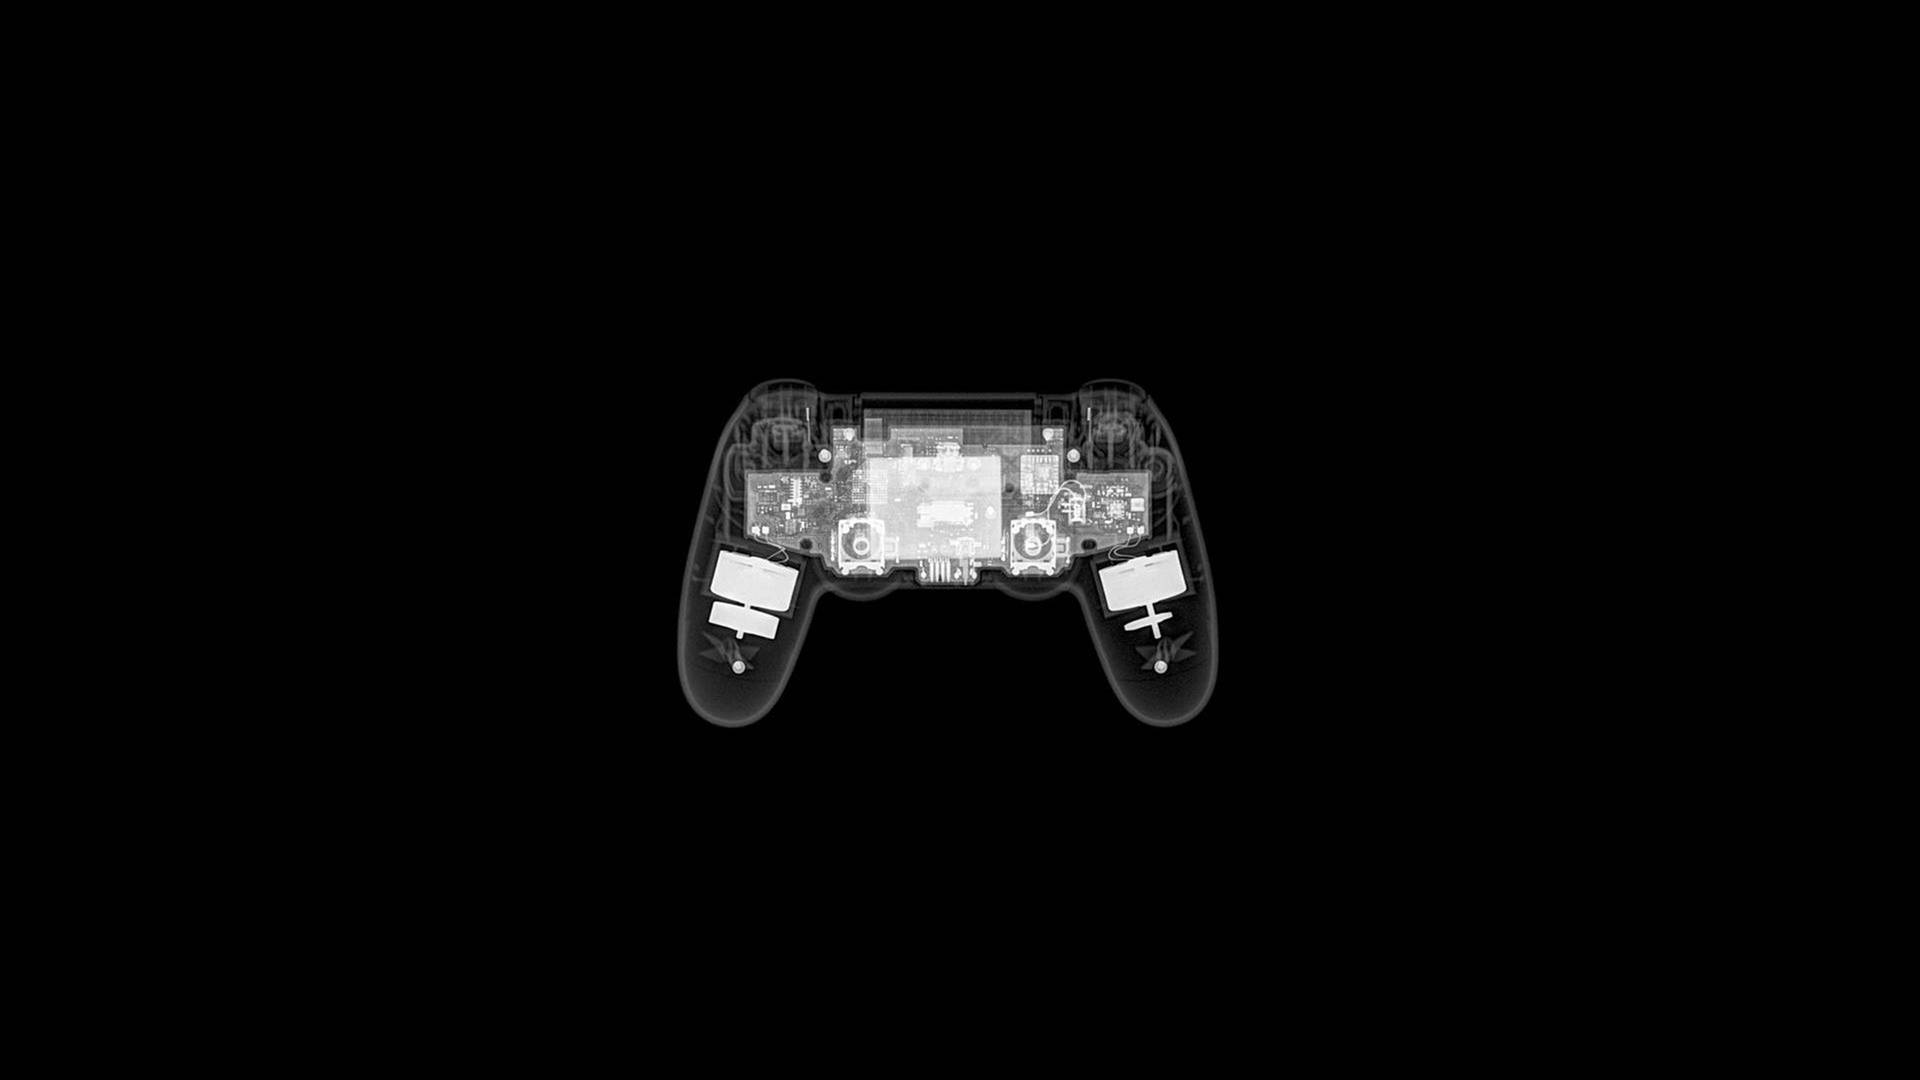 Download Xray Image Of A 4k Ps4 Controller Wallpaper 